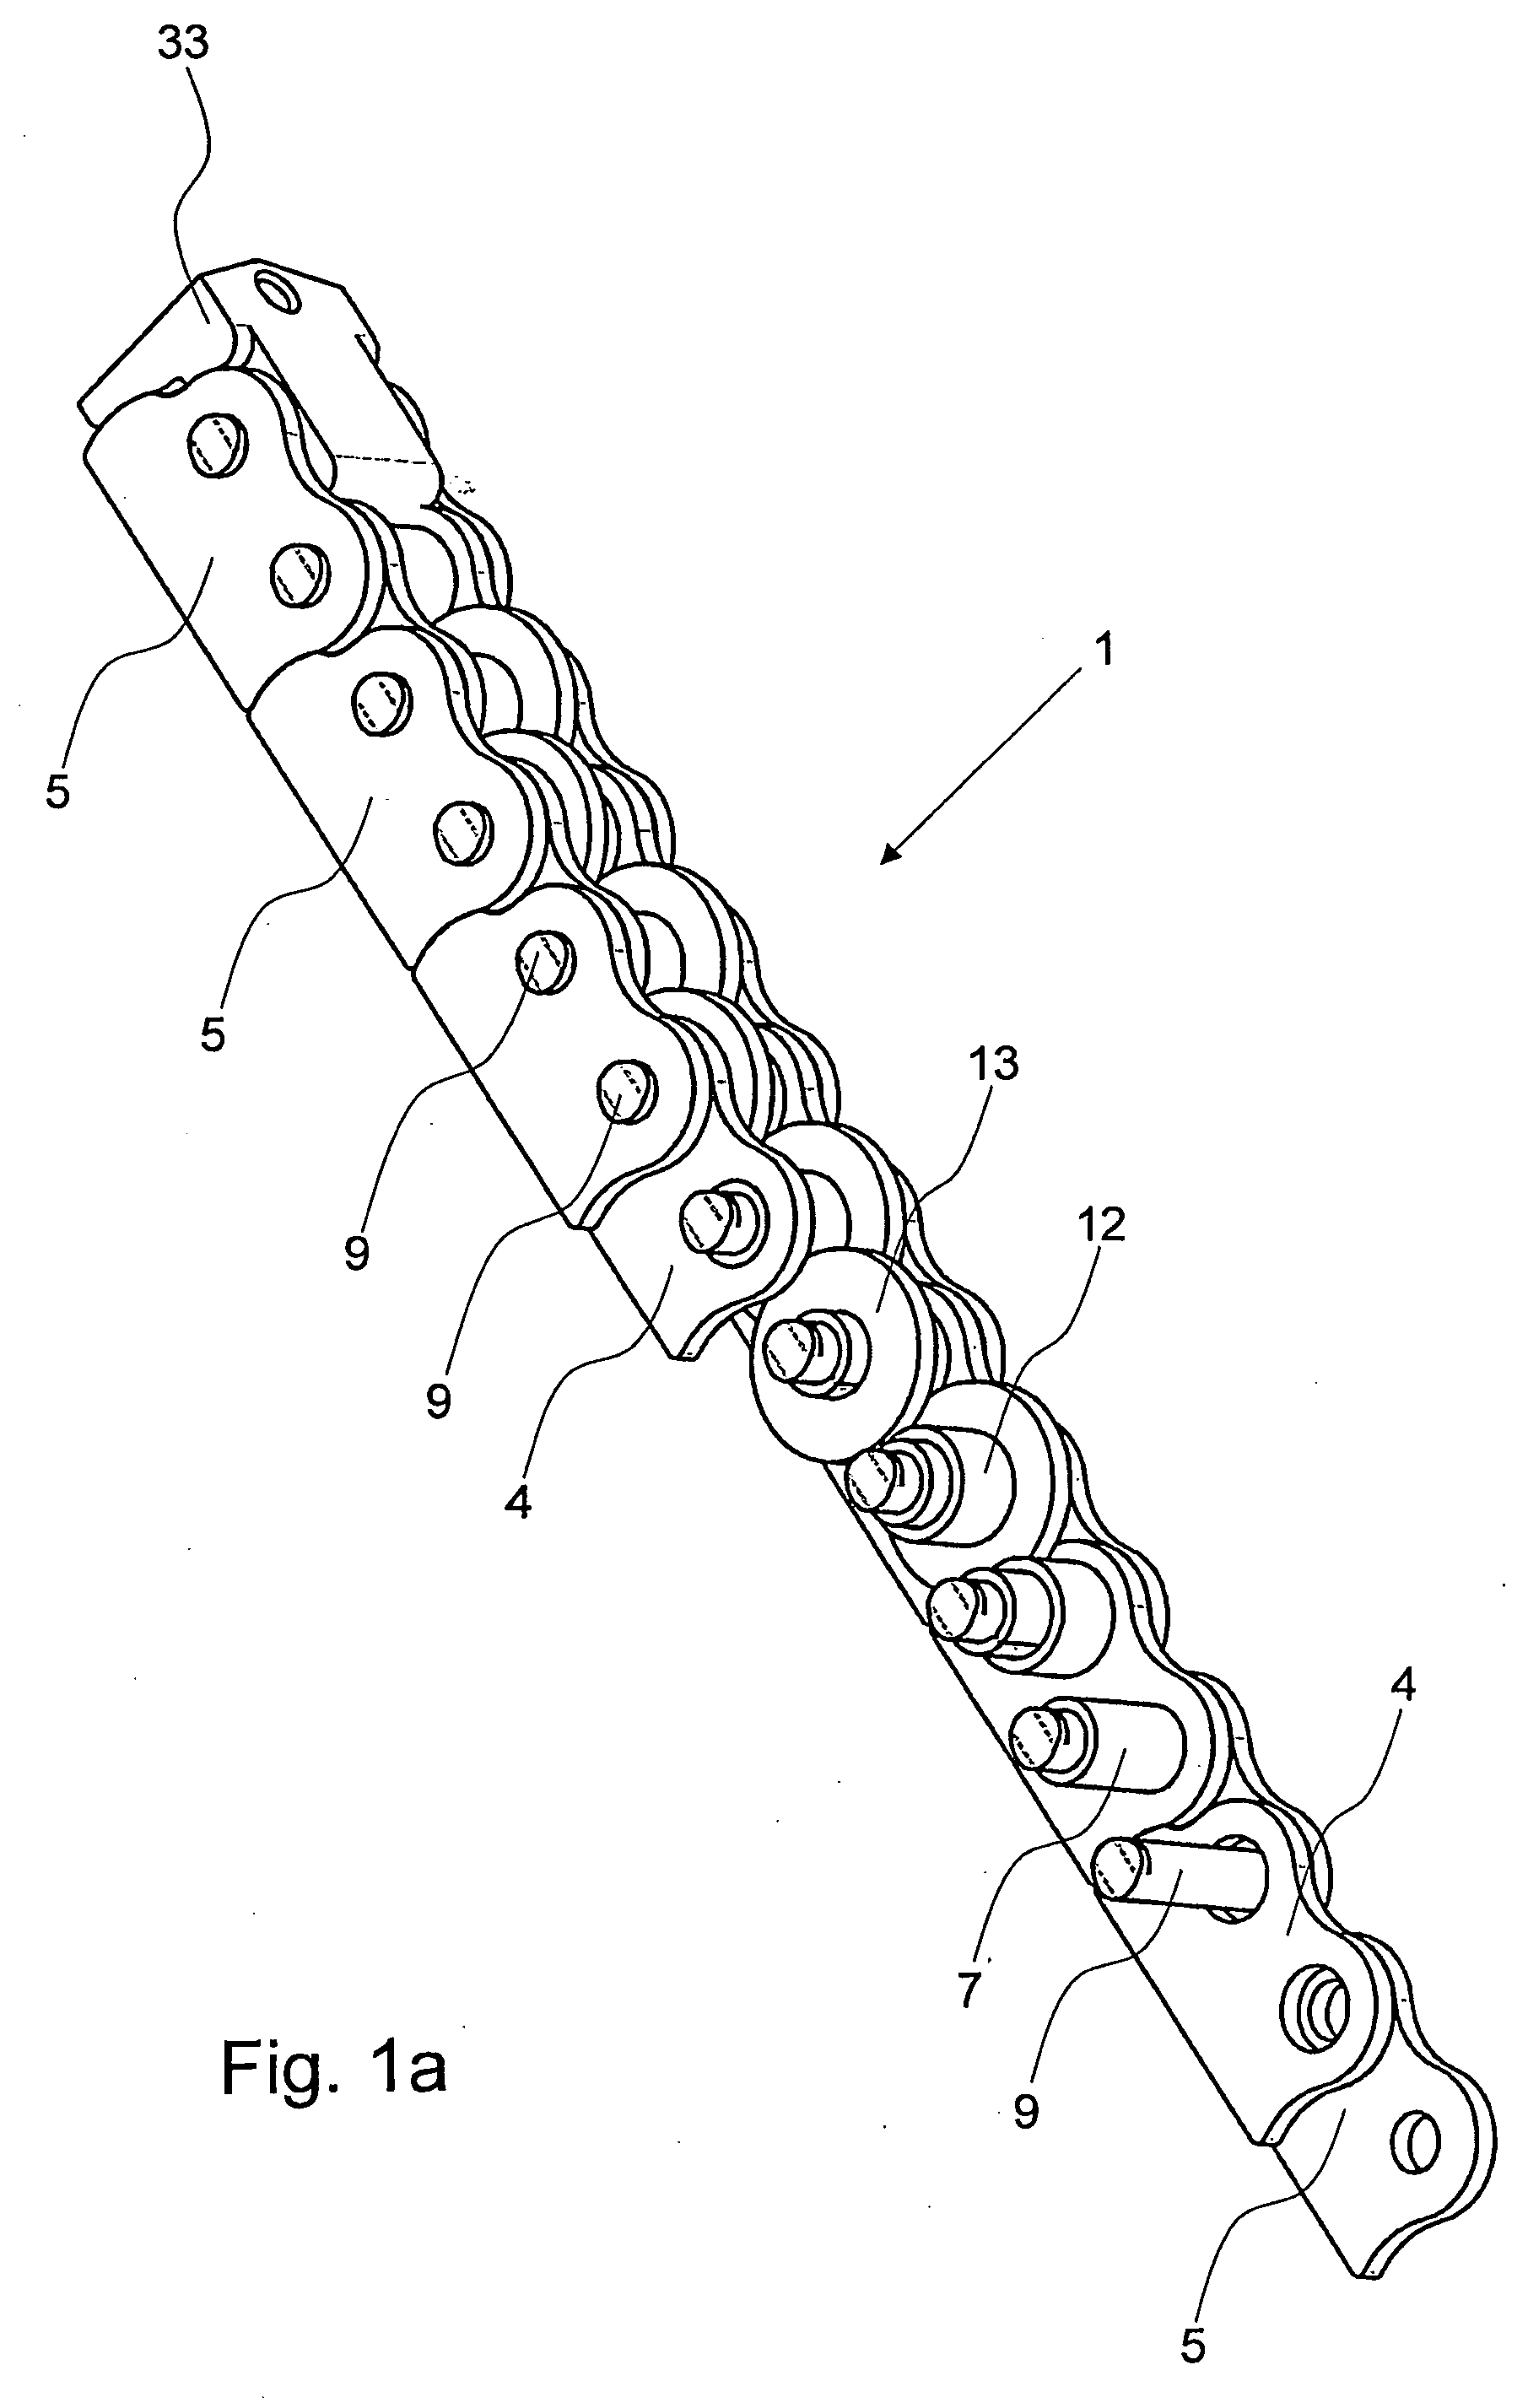 Push-Pull Chain and Actuator